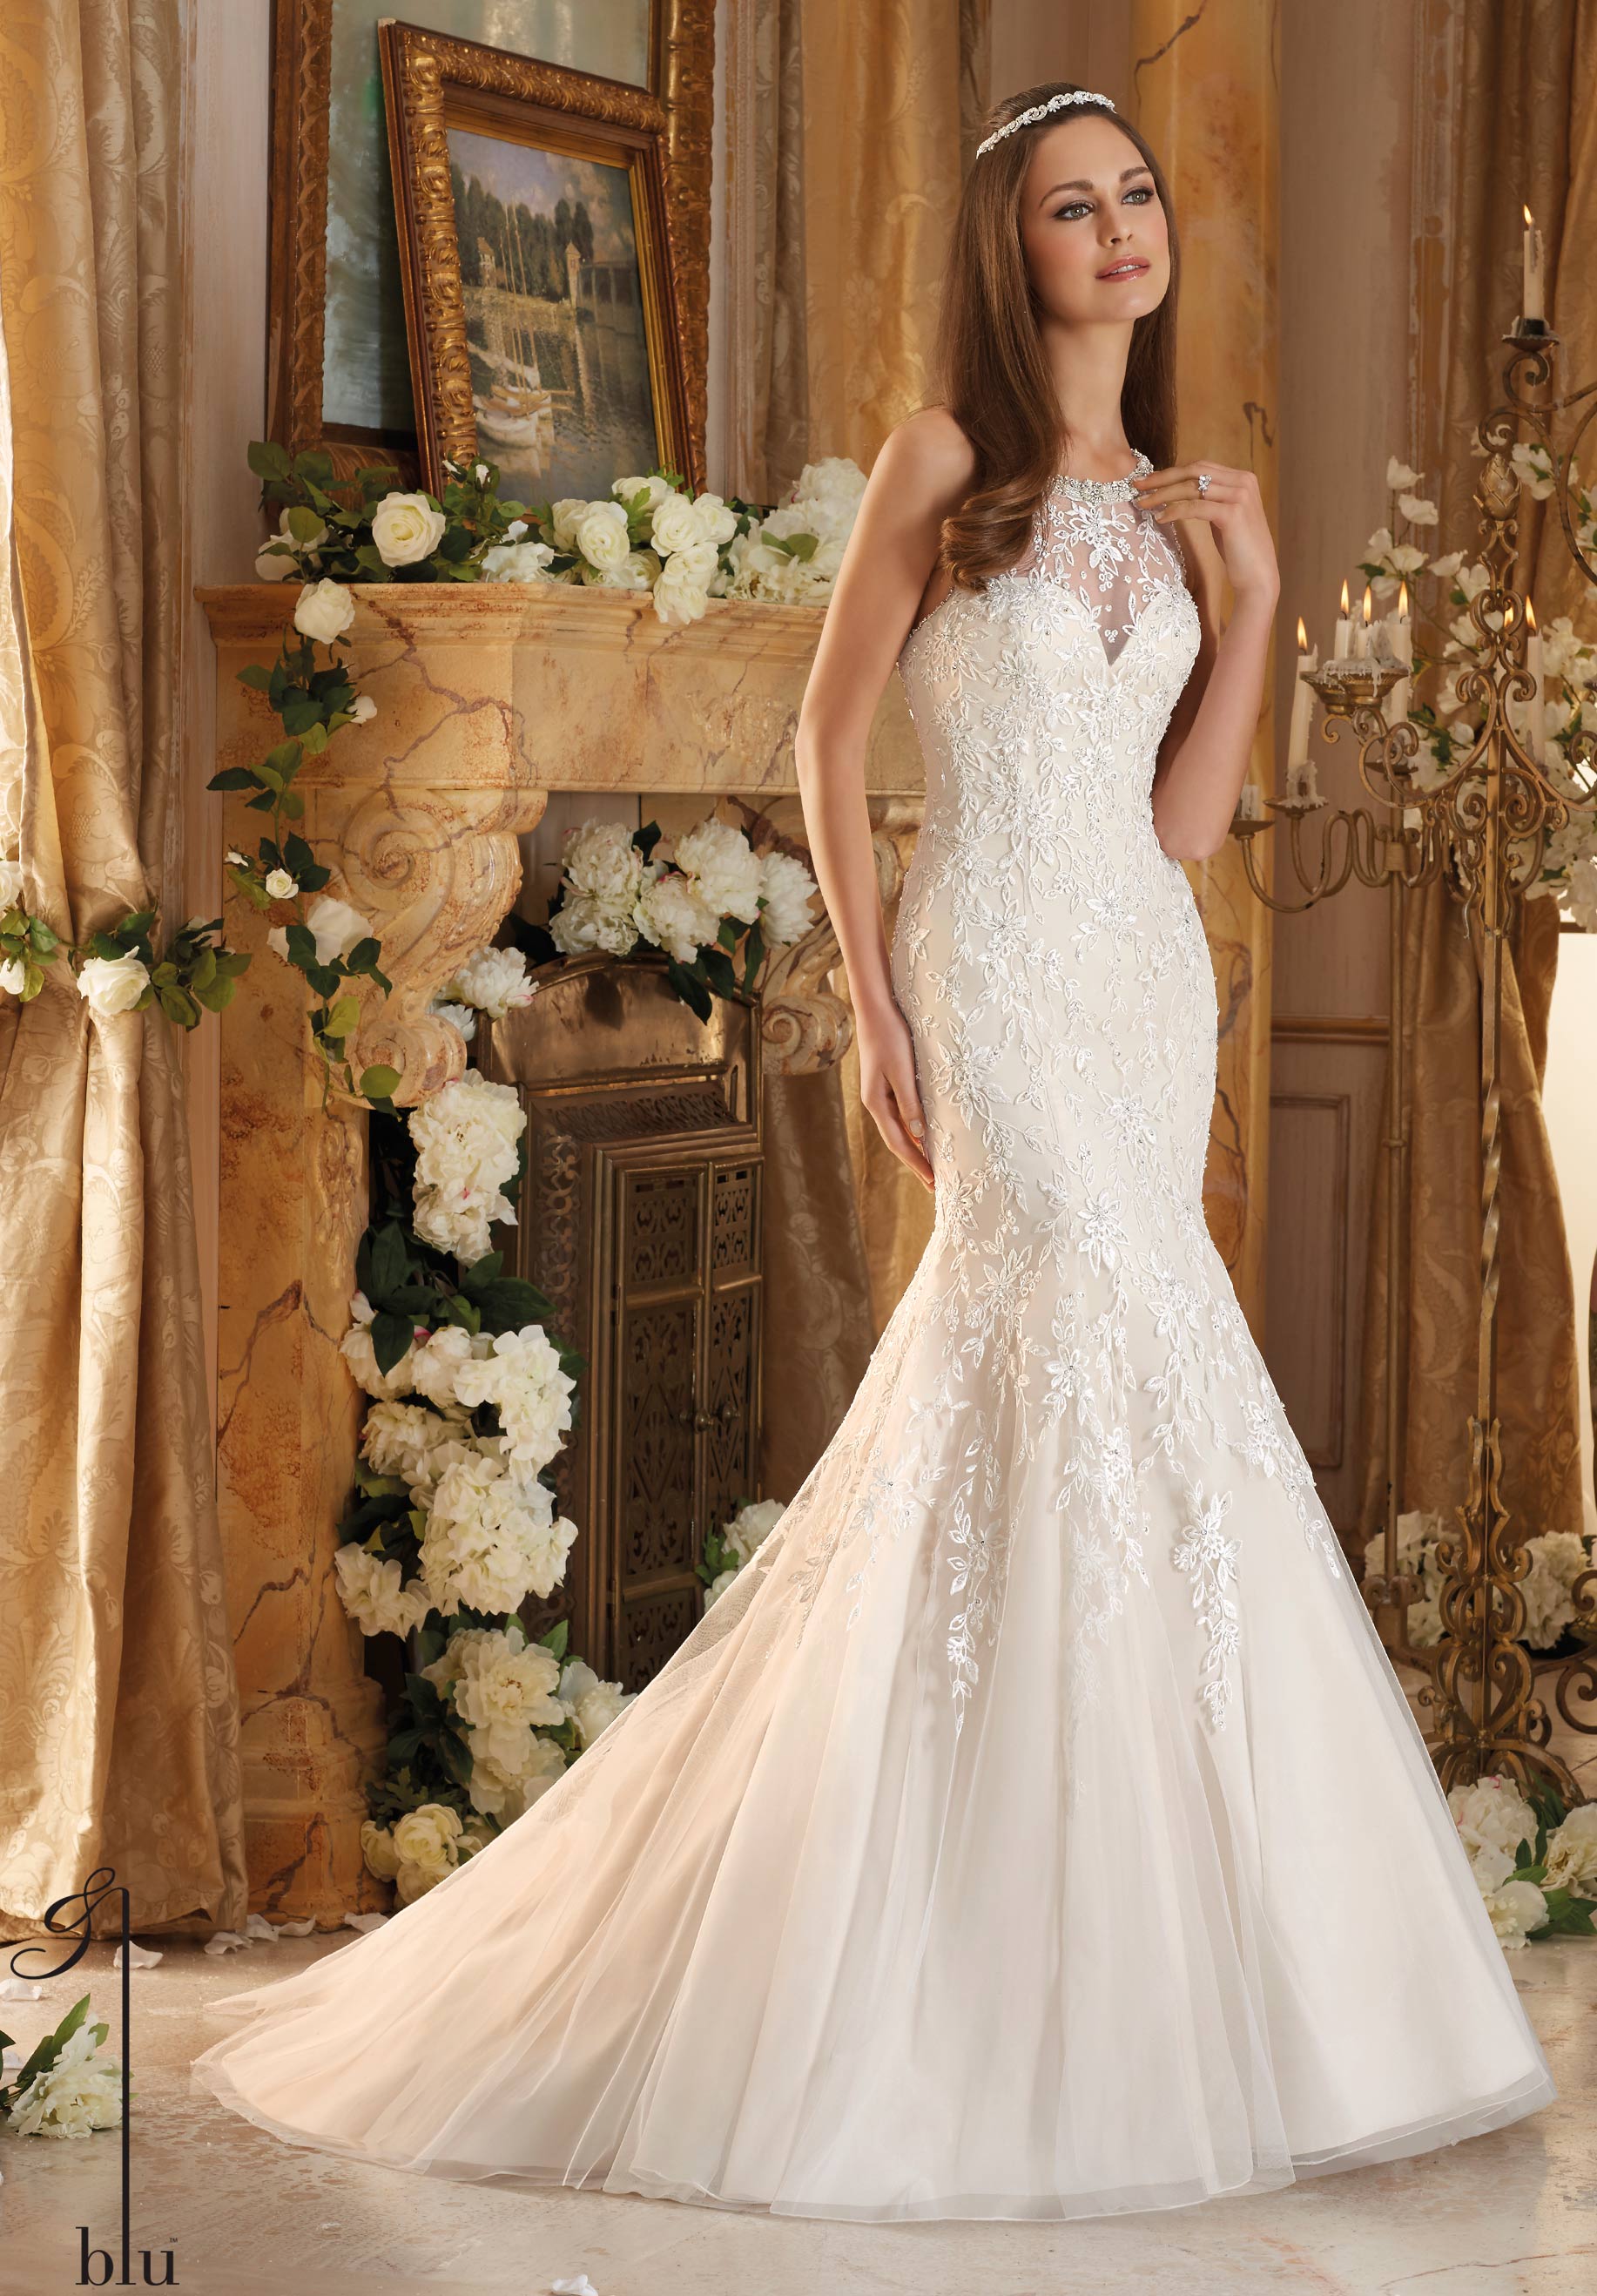 Wedding Dress Mori Lee Blue Fall 2016 Collection 5462 Embroidery